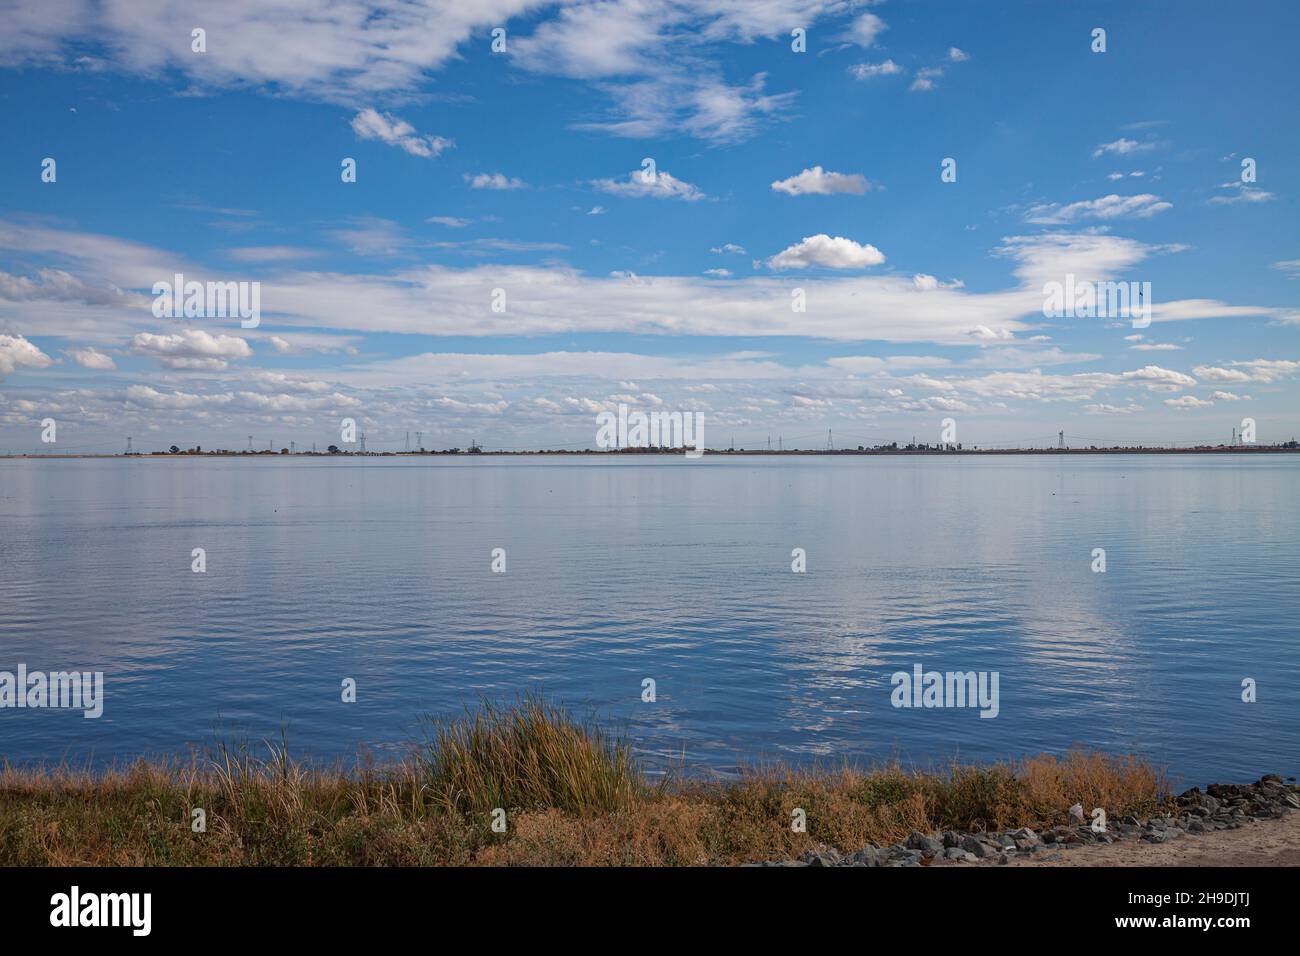 Clifton Court Forebay is a reservoir in the San Joaquin River Delta and is the intake point and start of the California Aqueduct for transport to Sout Stock Photo